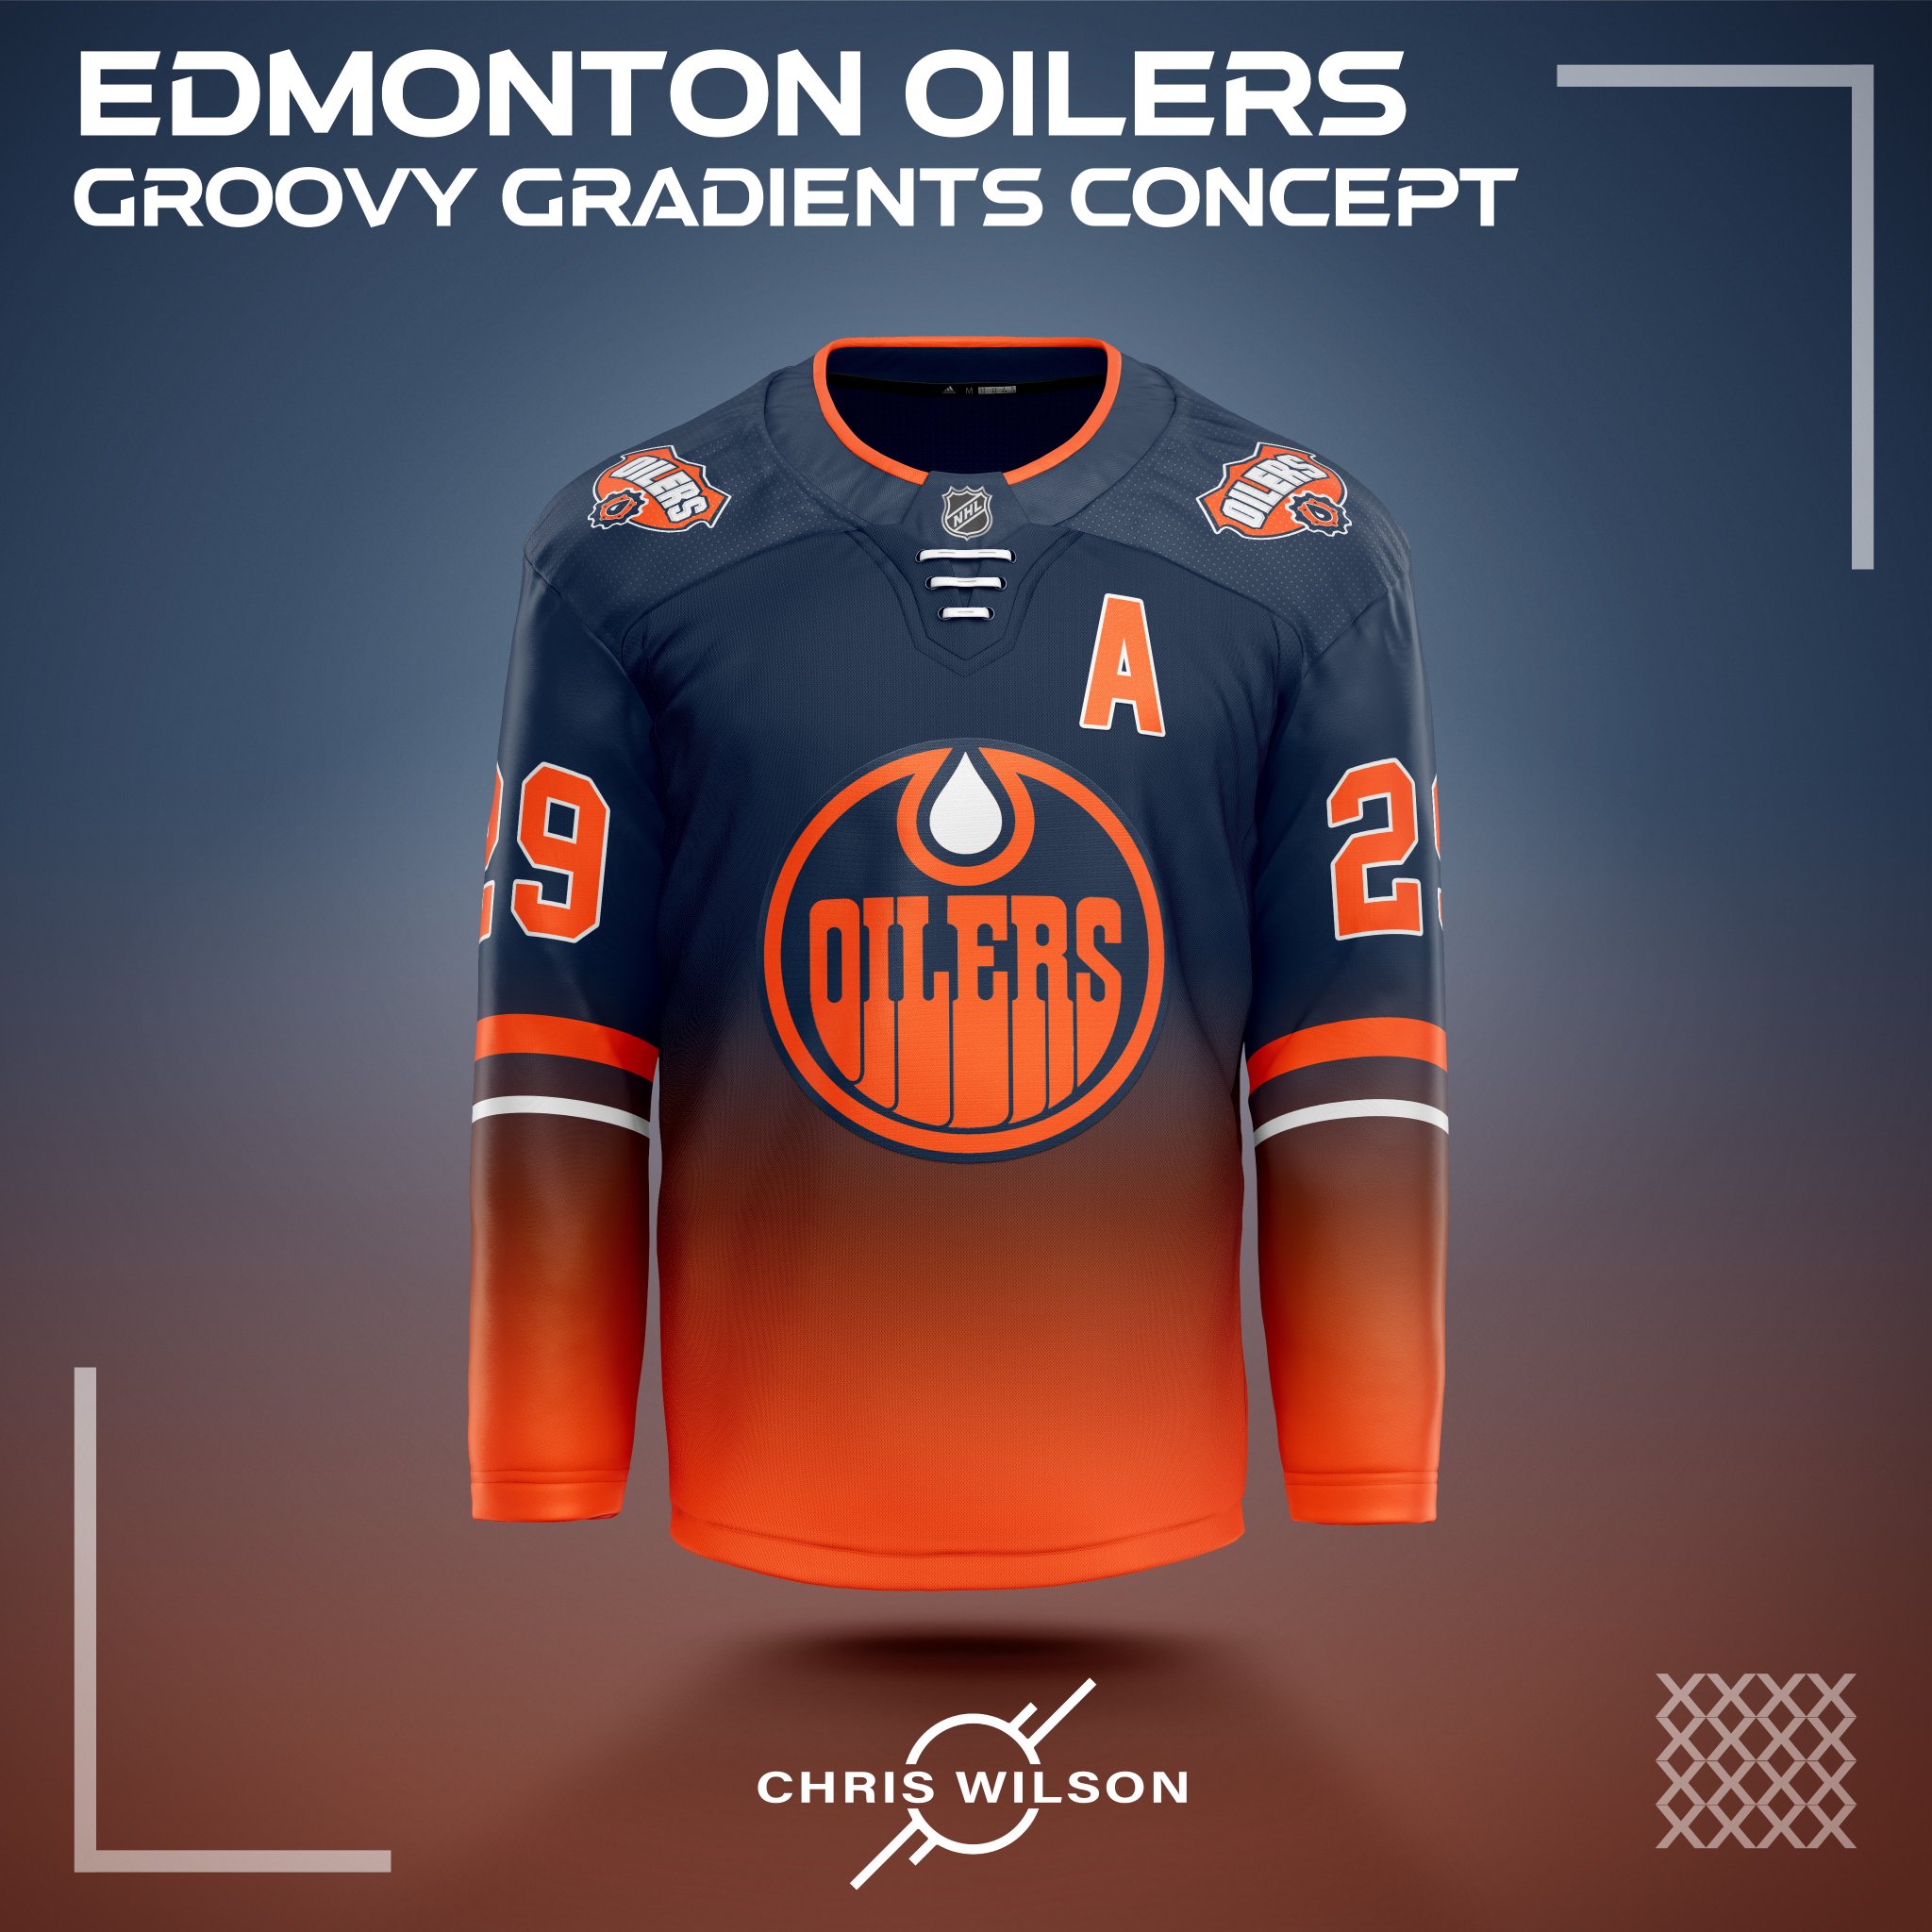 These awesome jersey concepts give the Edmonton Oilers' new